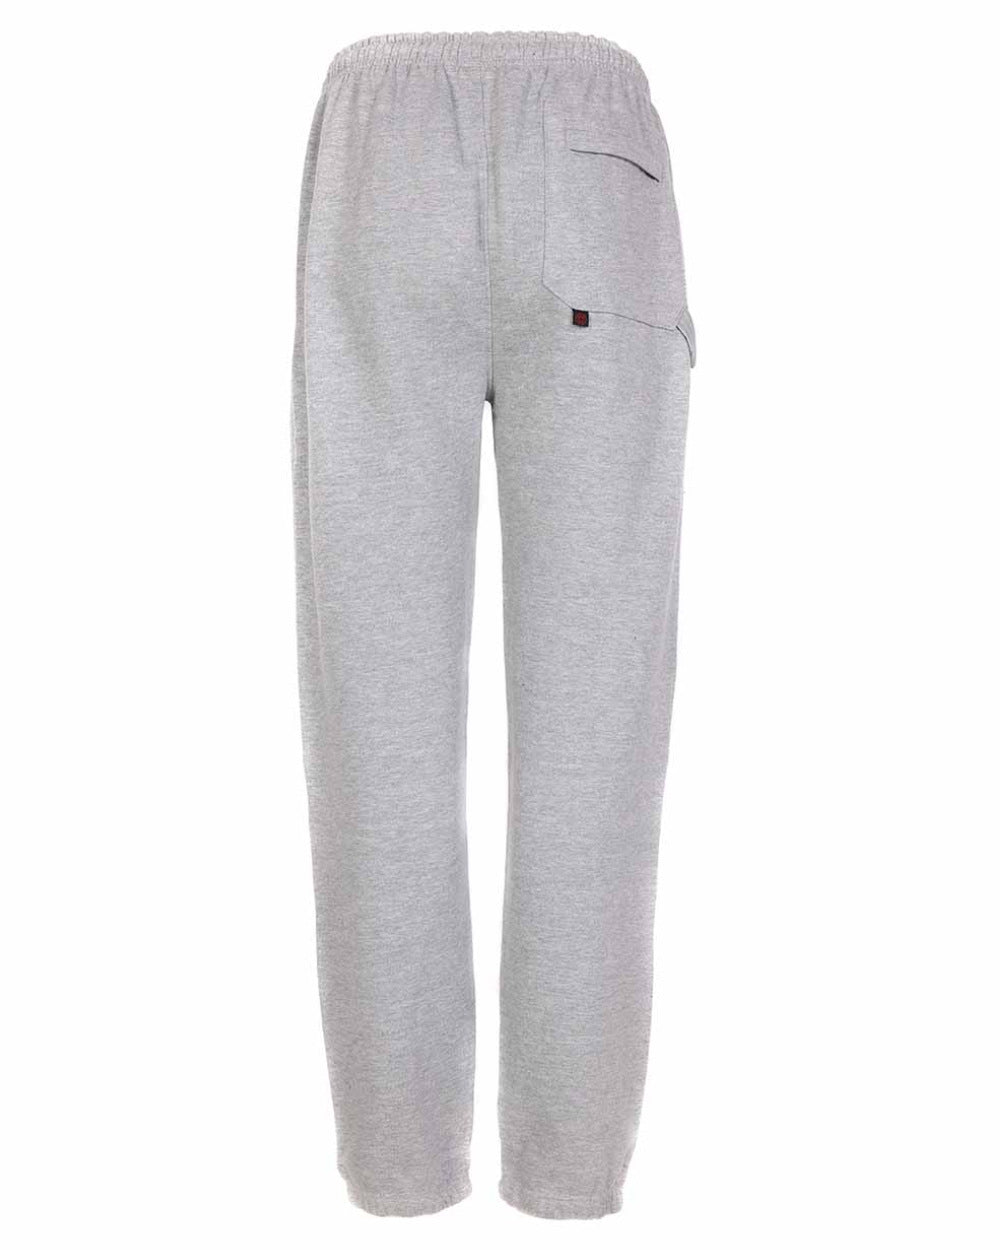 Grey Coloured TuffStuff Comfort Work Trouser On A White Background 